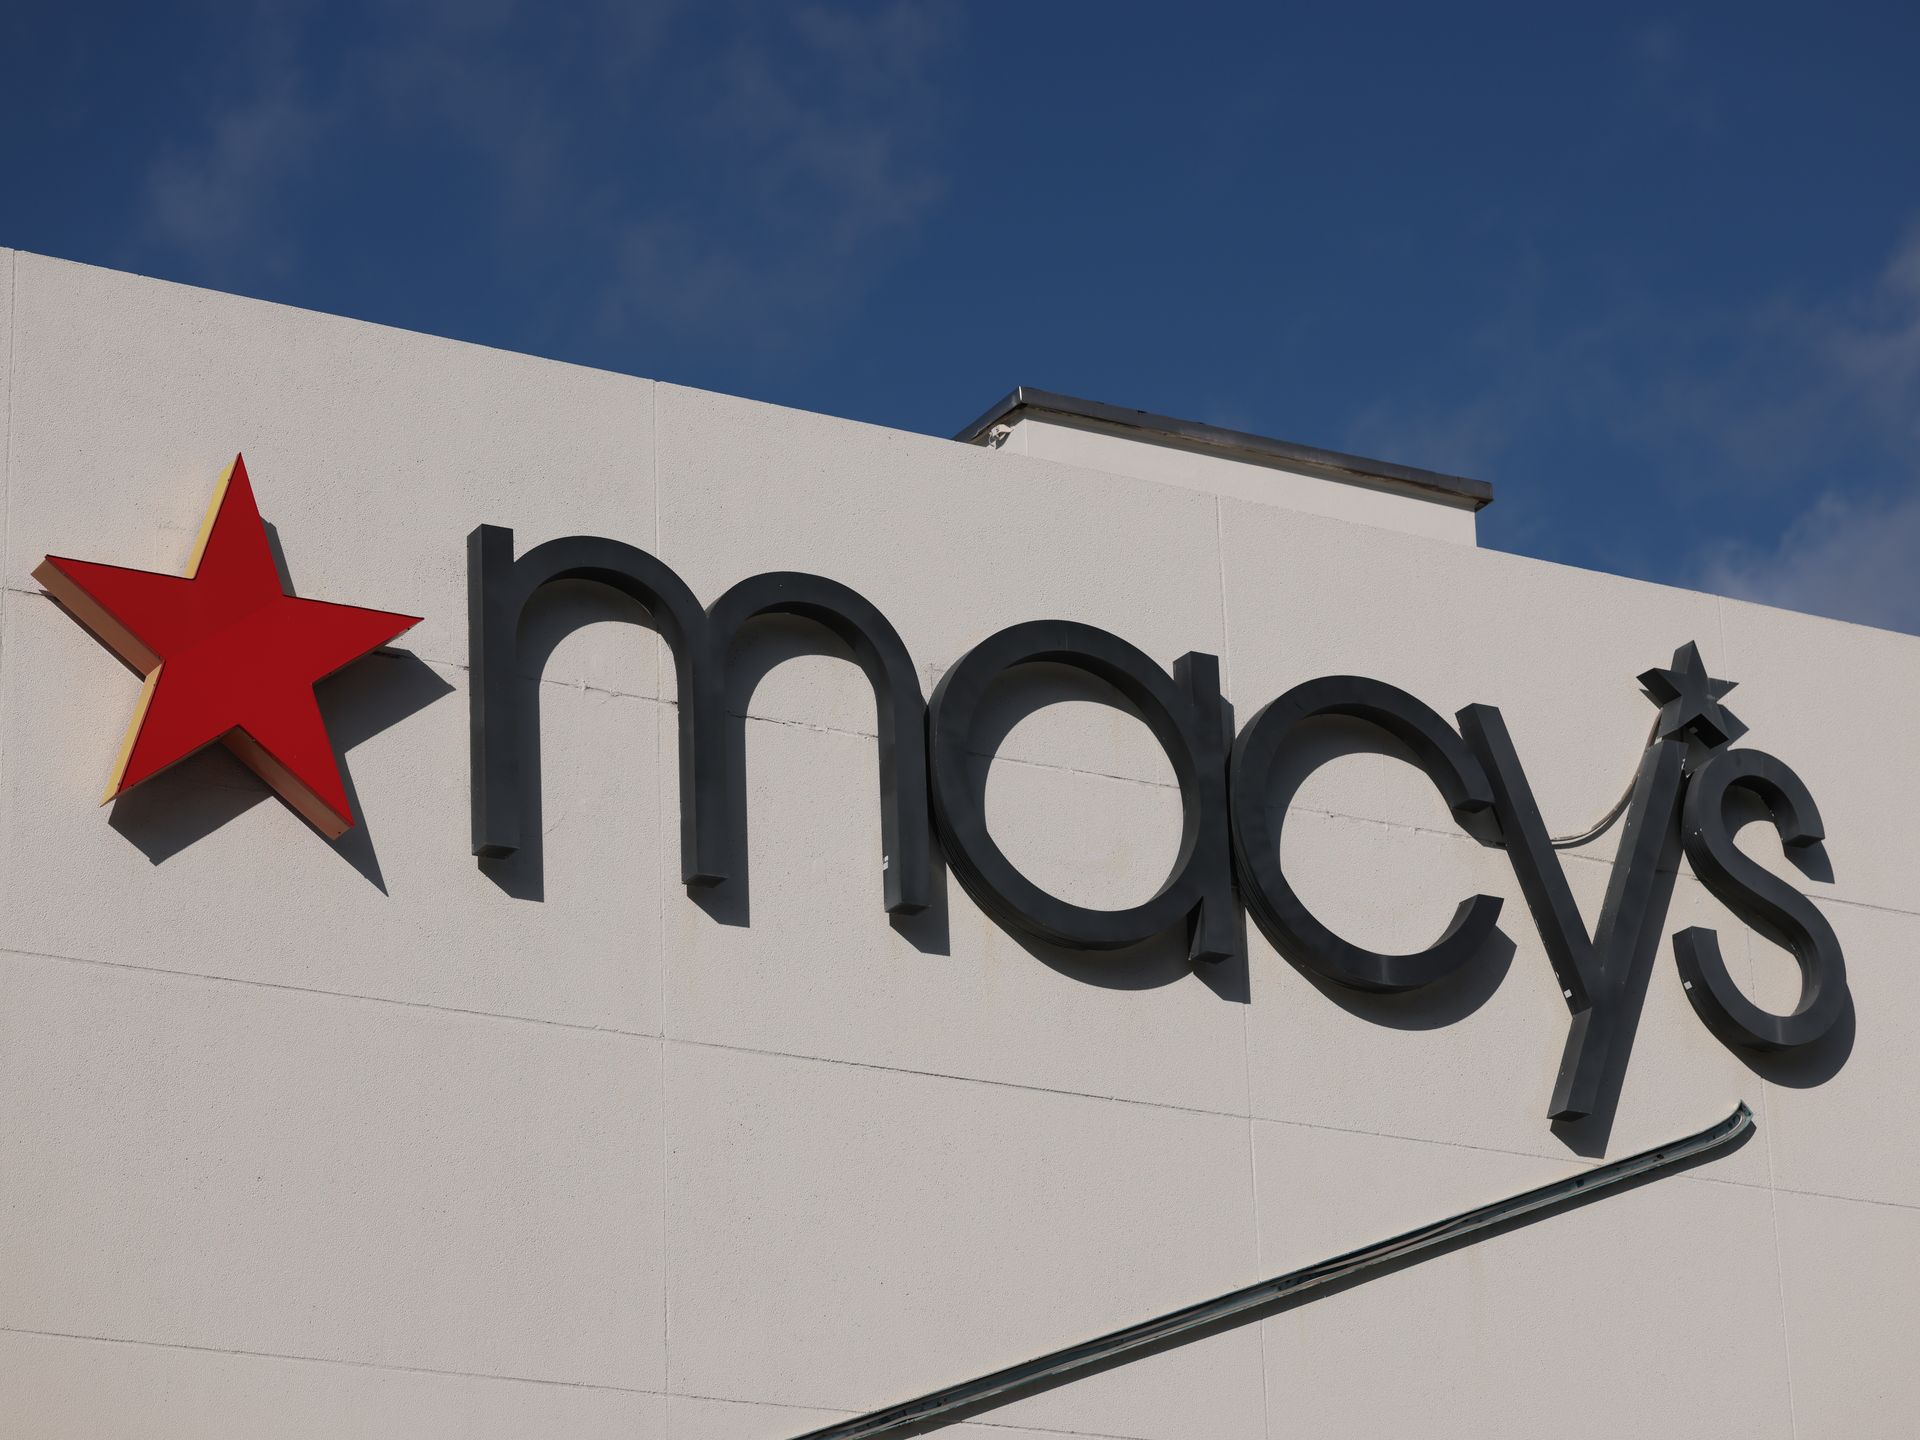 Smaller-format Macy's store coming to valley